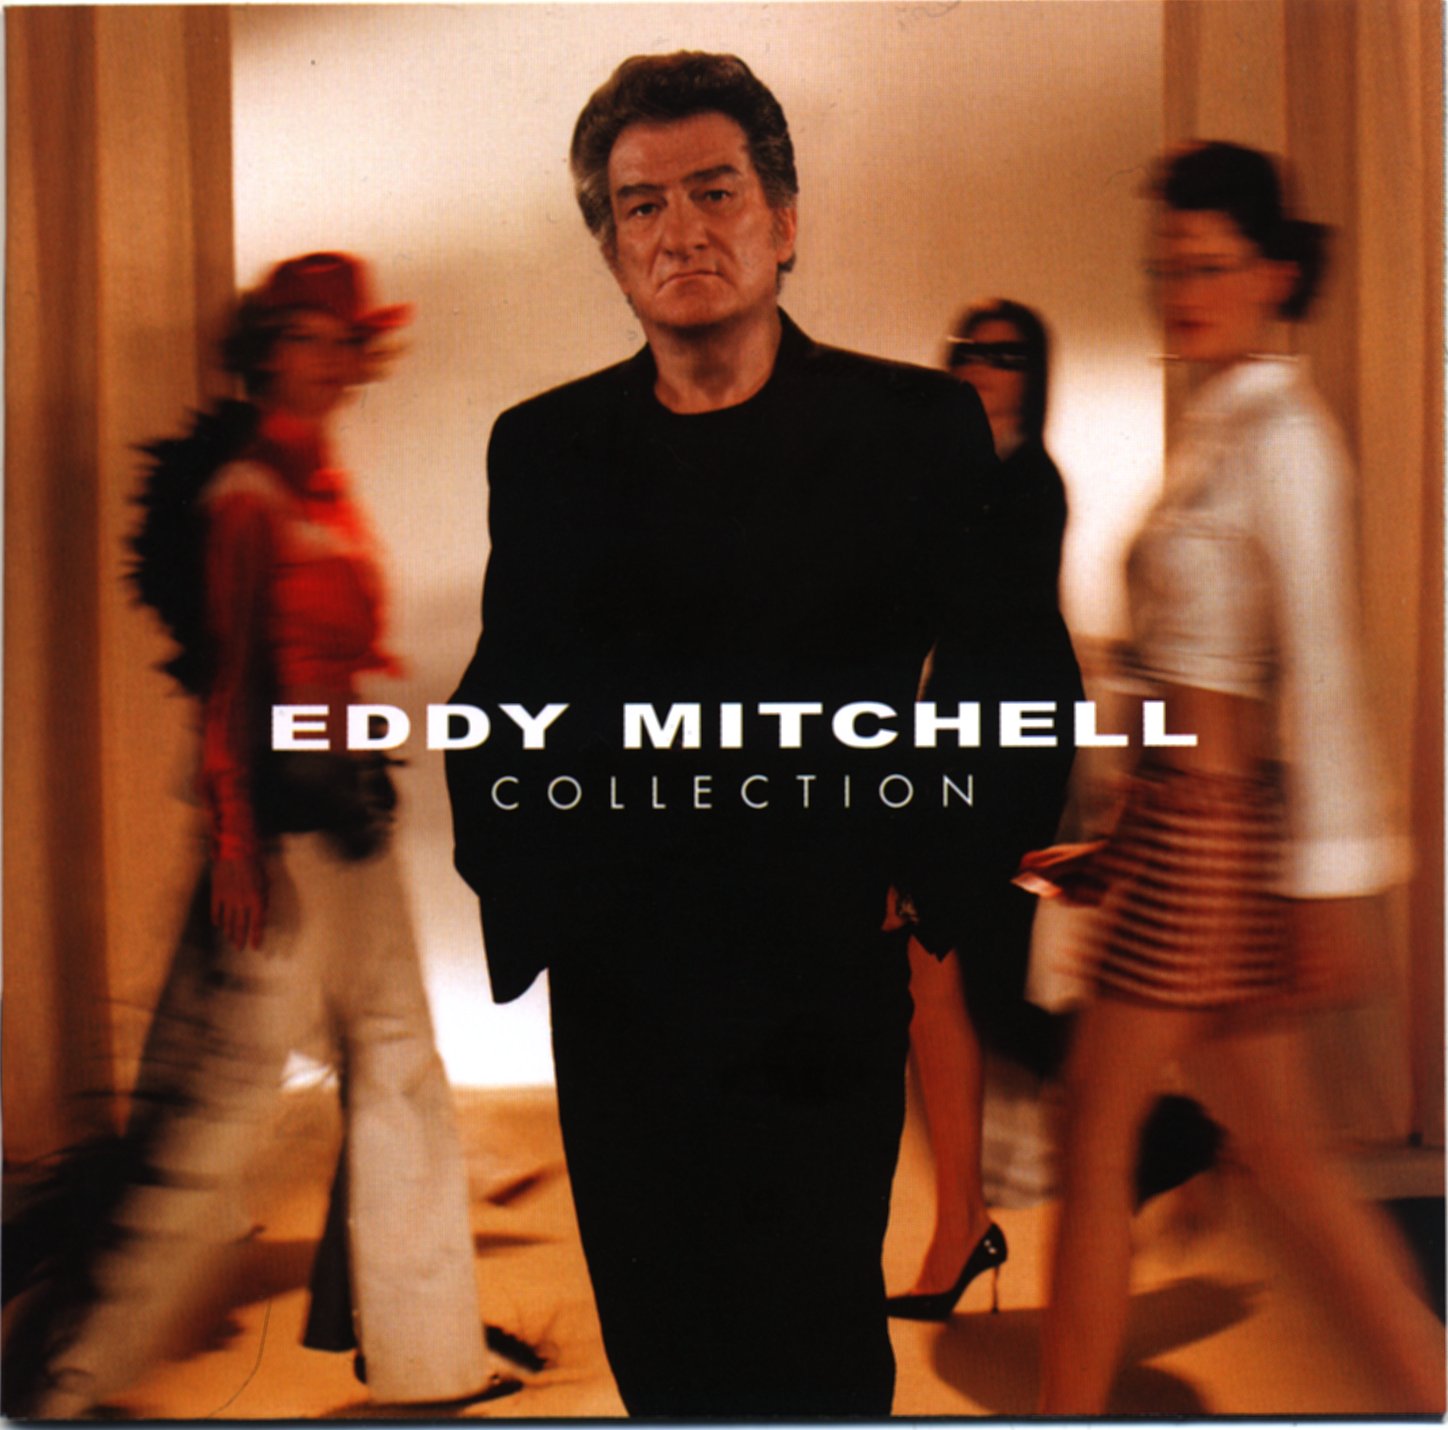 eddy mitchell-collection-front (streamload)